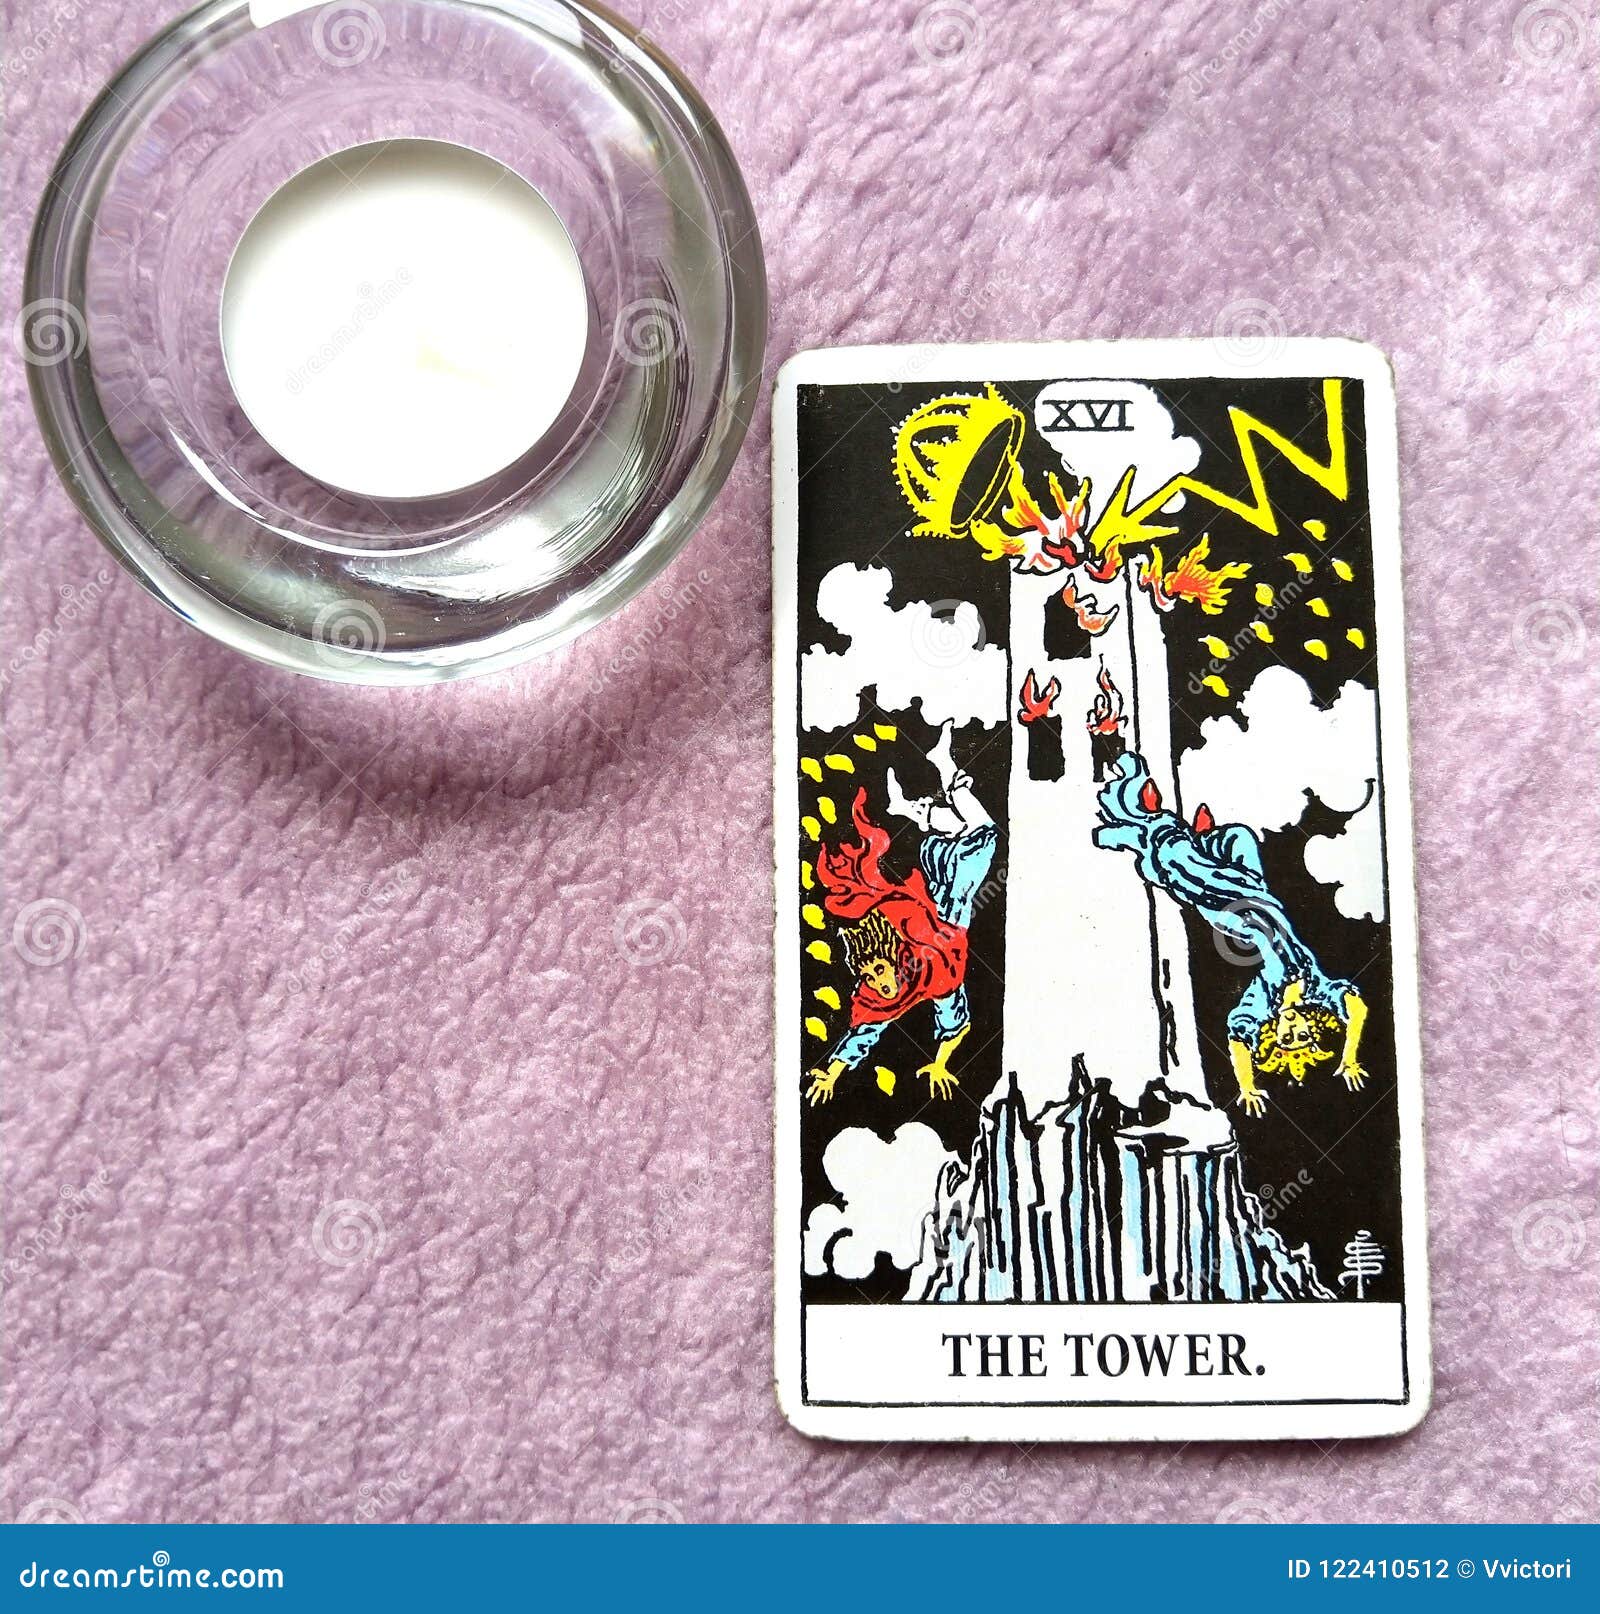 the tower tarot card sudden and unexpected change, upheaval, destruction, ruin, catastrophe